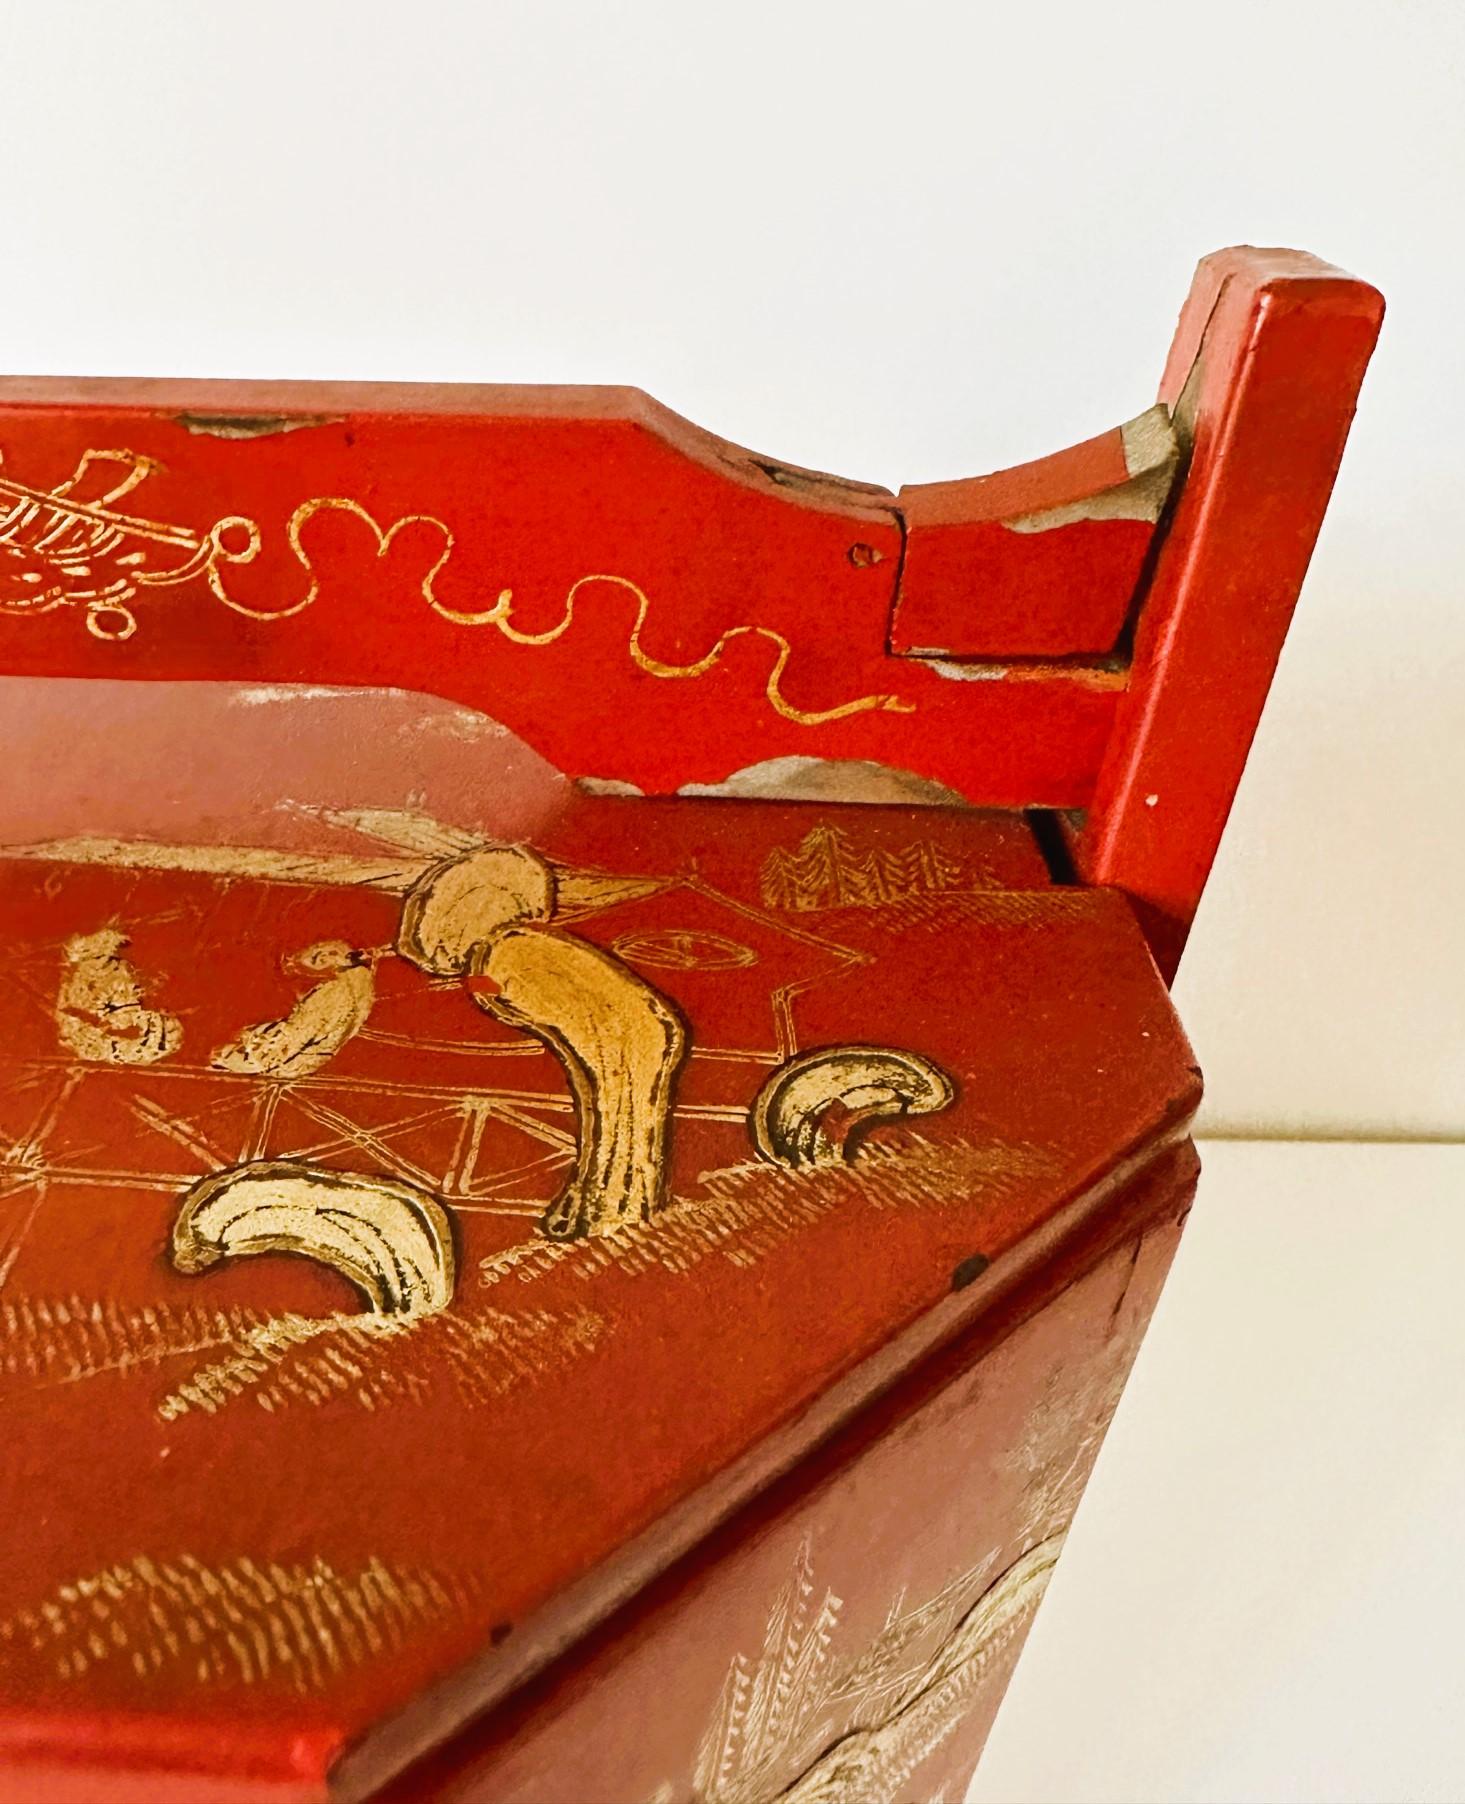 19th Century Red and Gold Lacquer Portable Tea Bucket and Cover Ryukyu Kingdom Okinawa For Sale